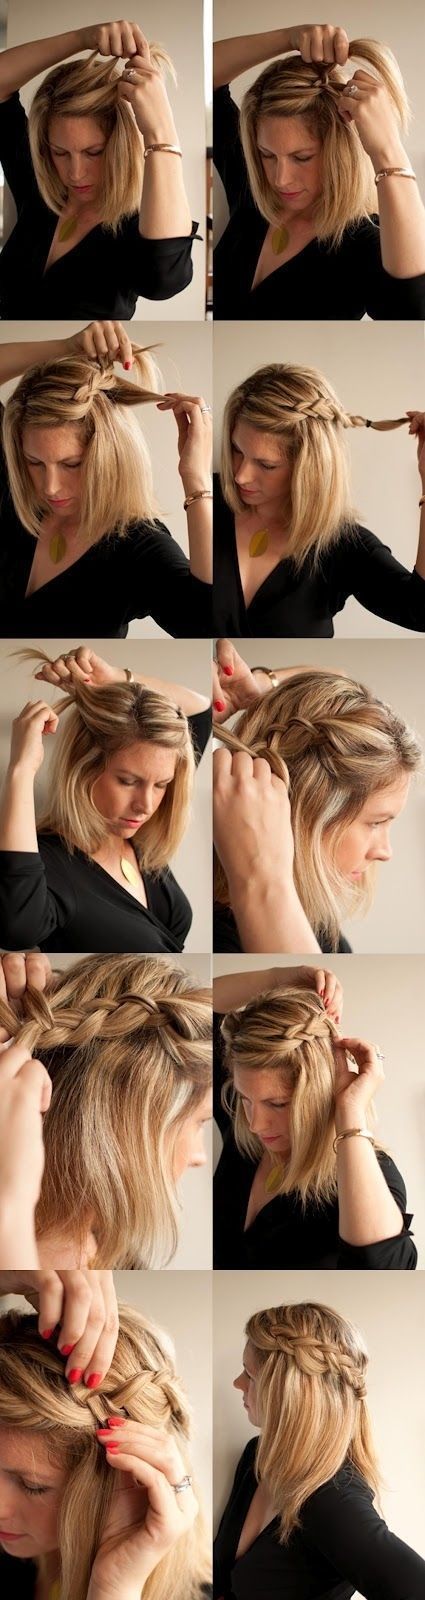 Creative Hairstyles That You Can Easily Do at Home